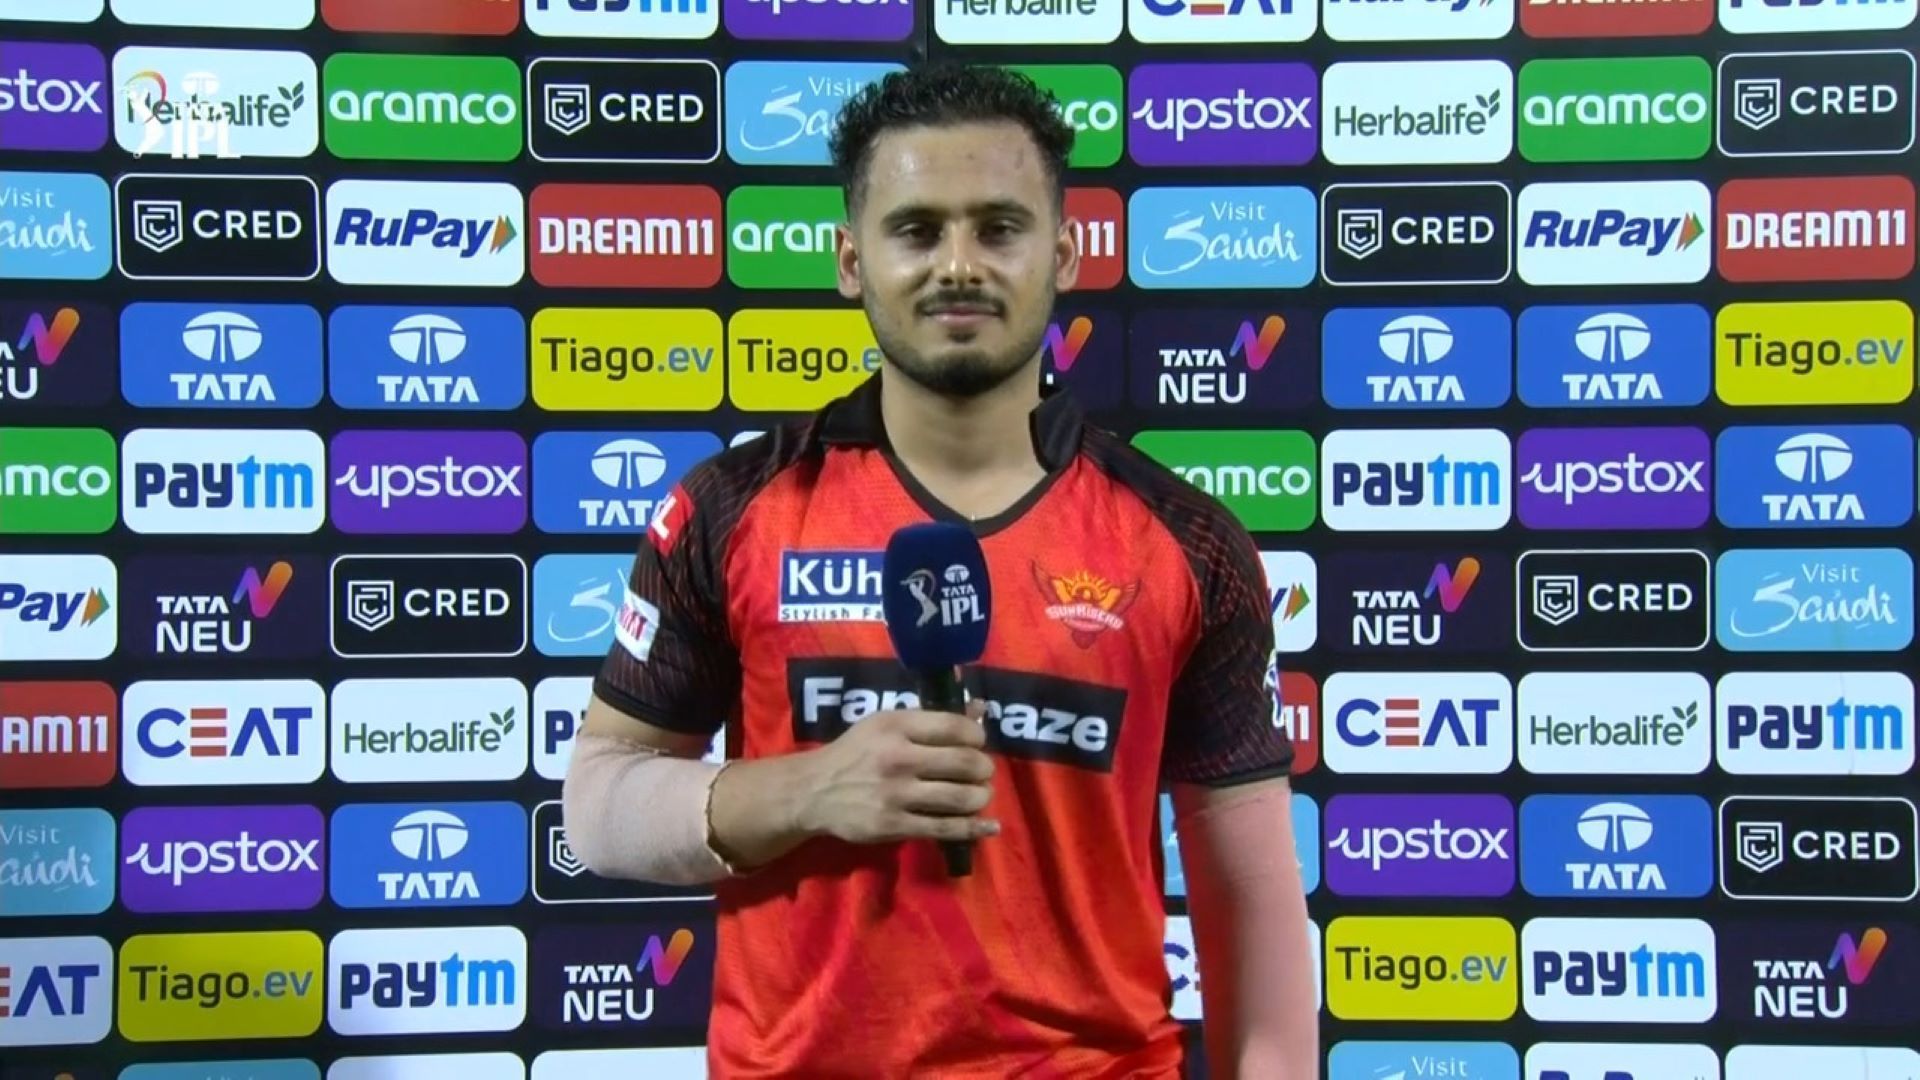 Abdul Samad was relieved to help SRH get over the line after the disappointing end against KKR.